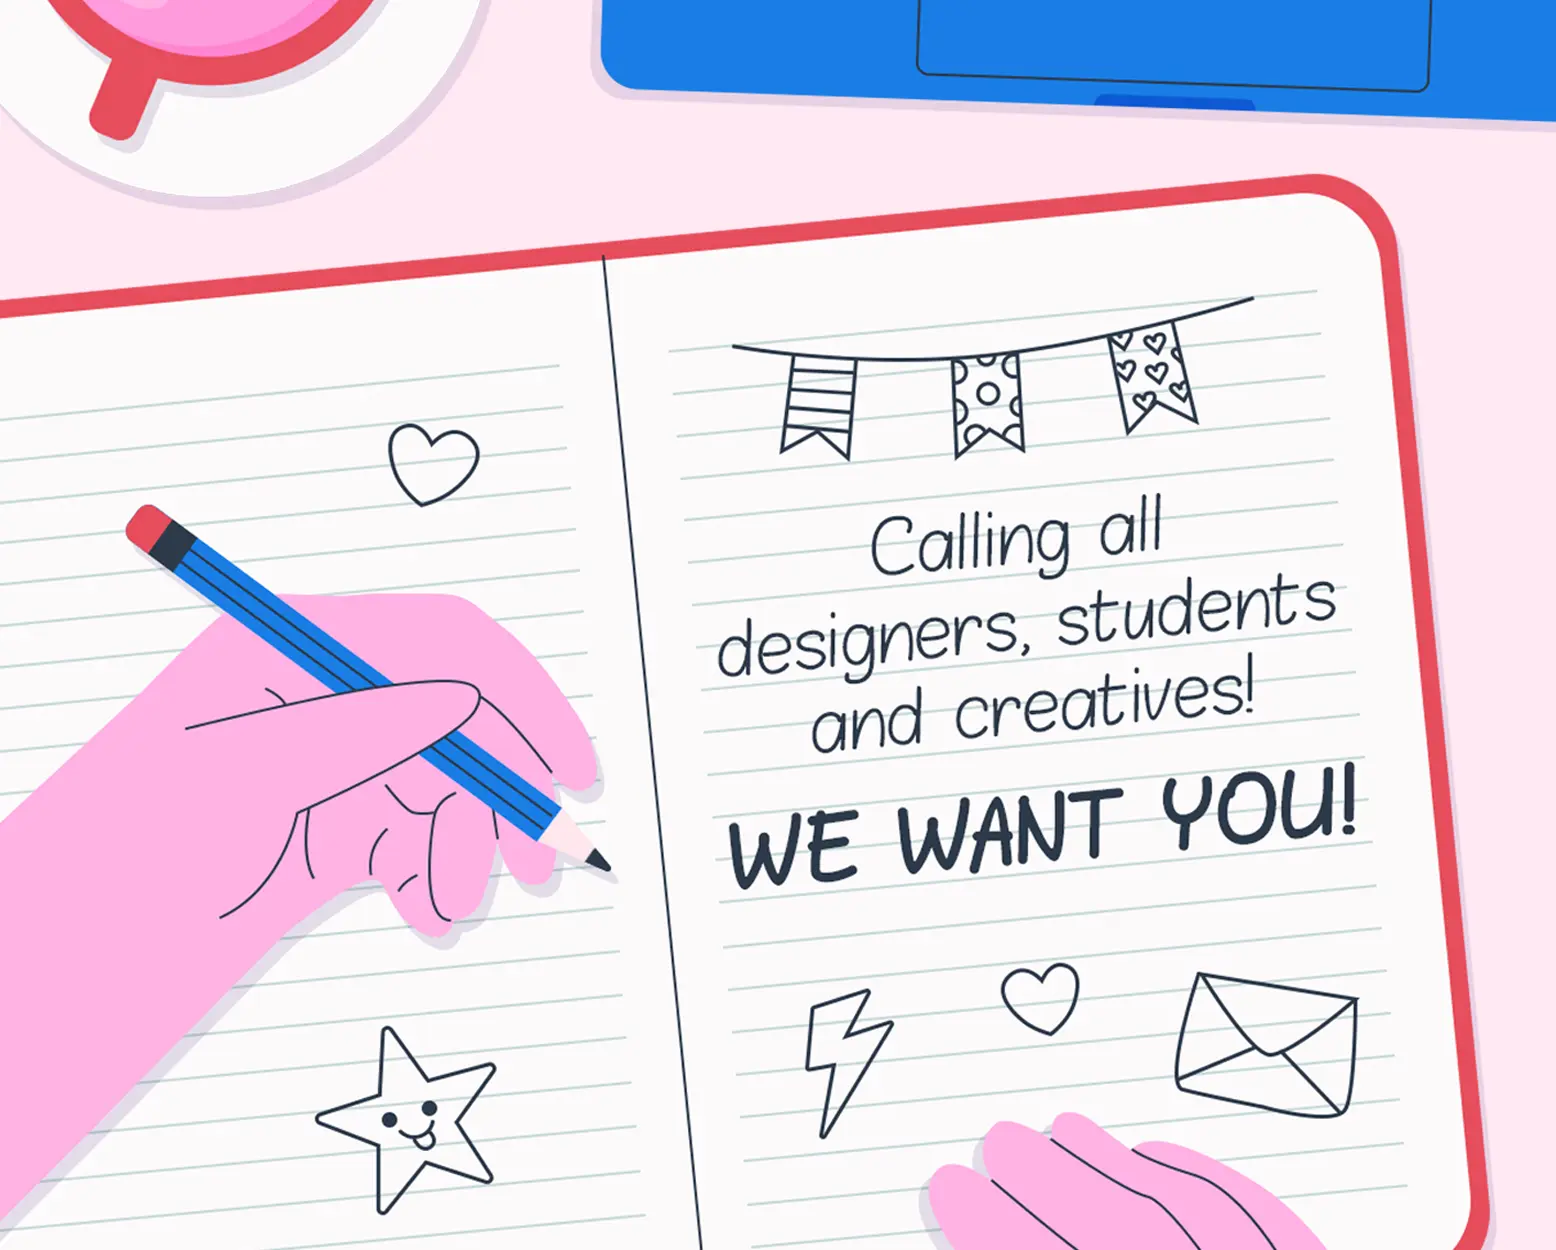 Calling all designers, students and creatives—we want you!